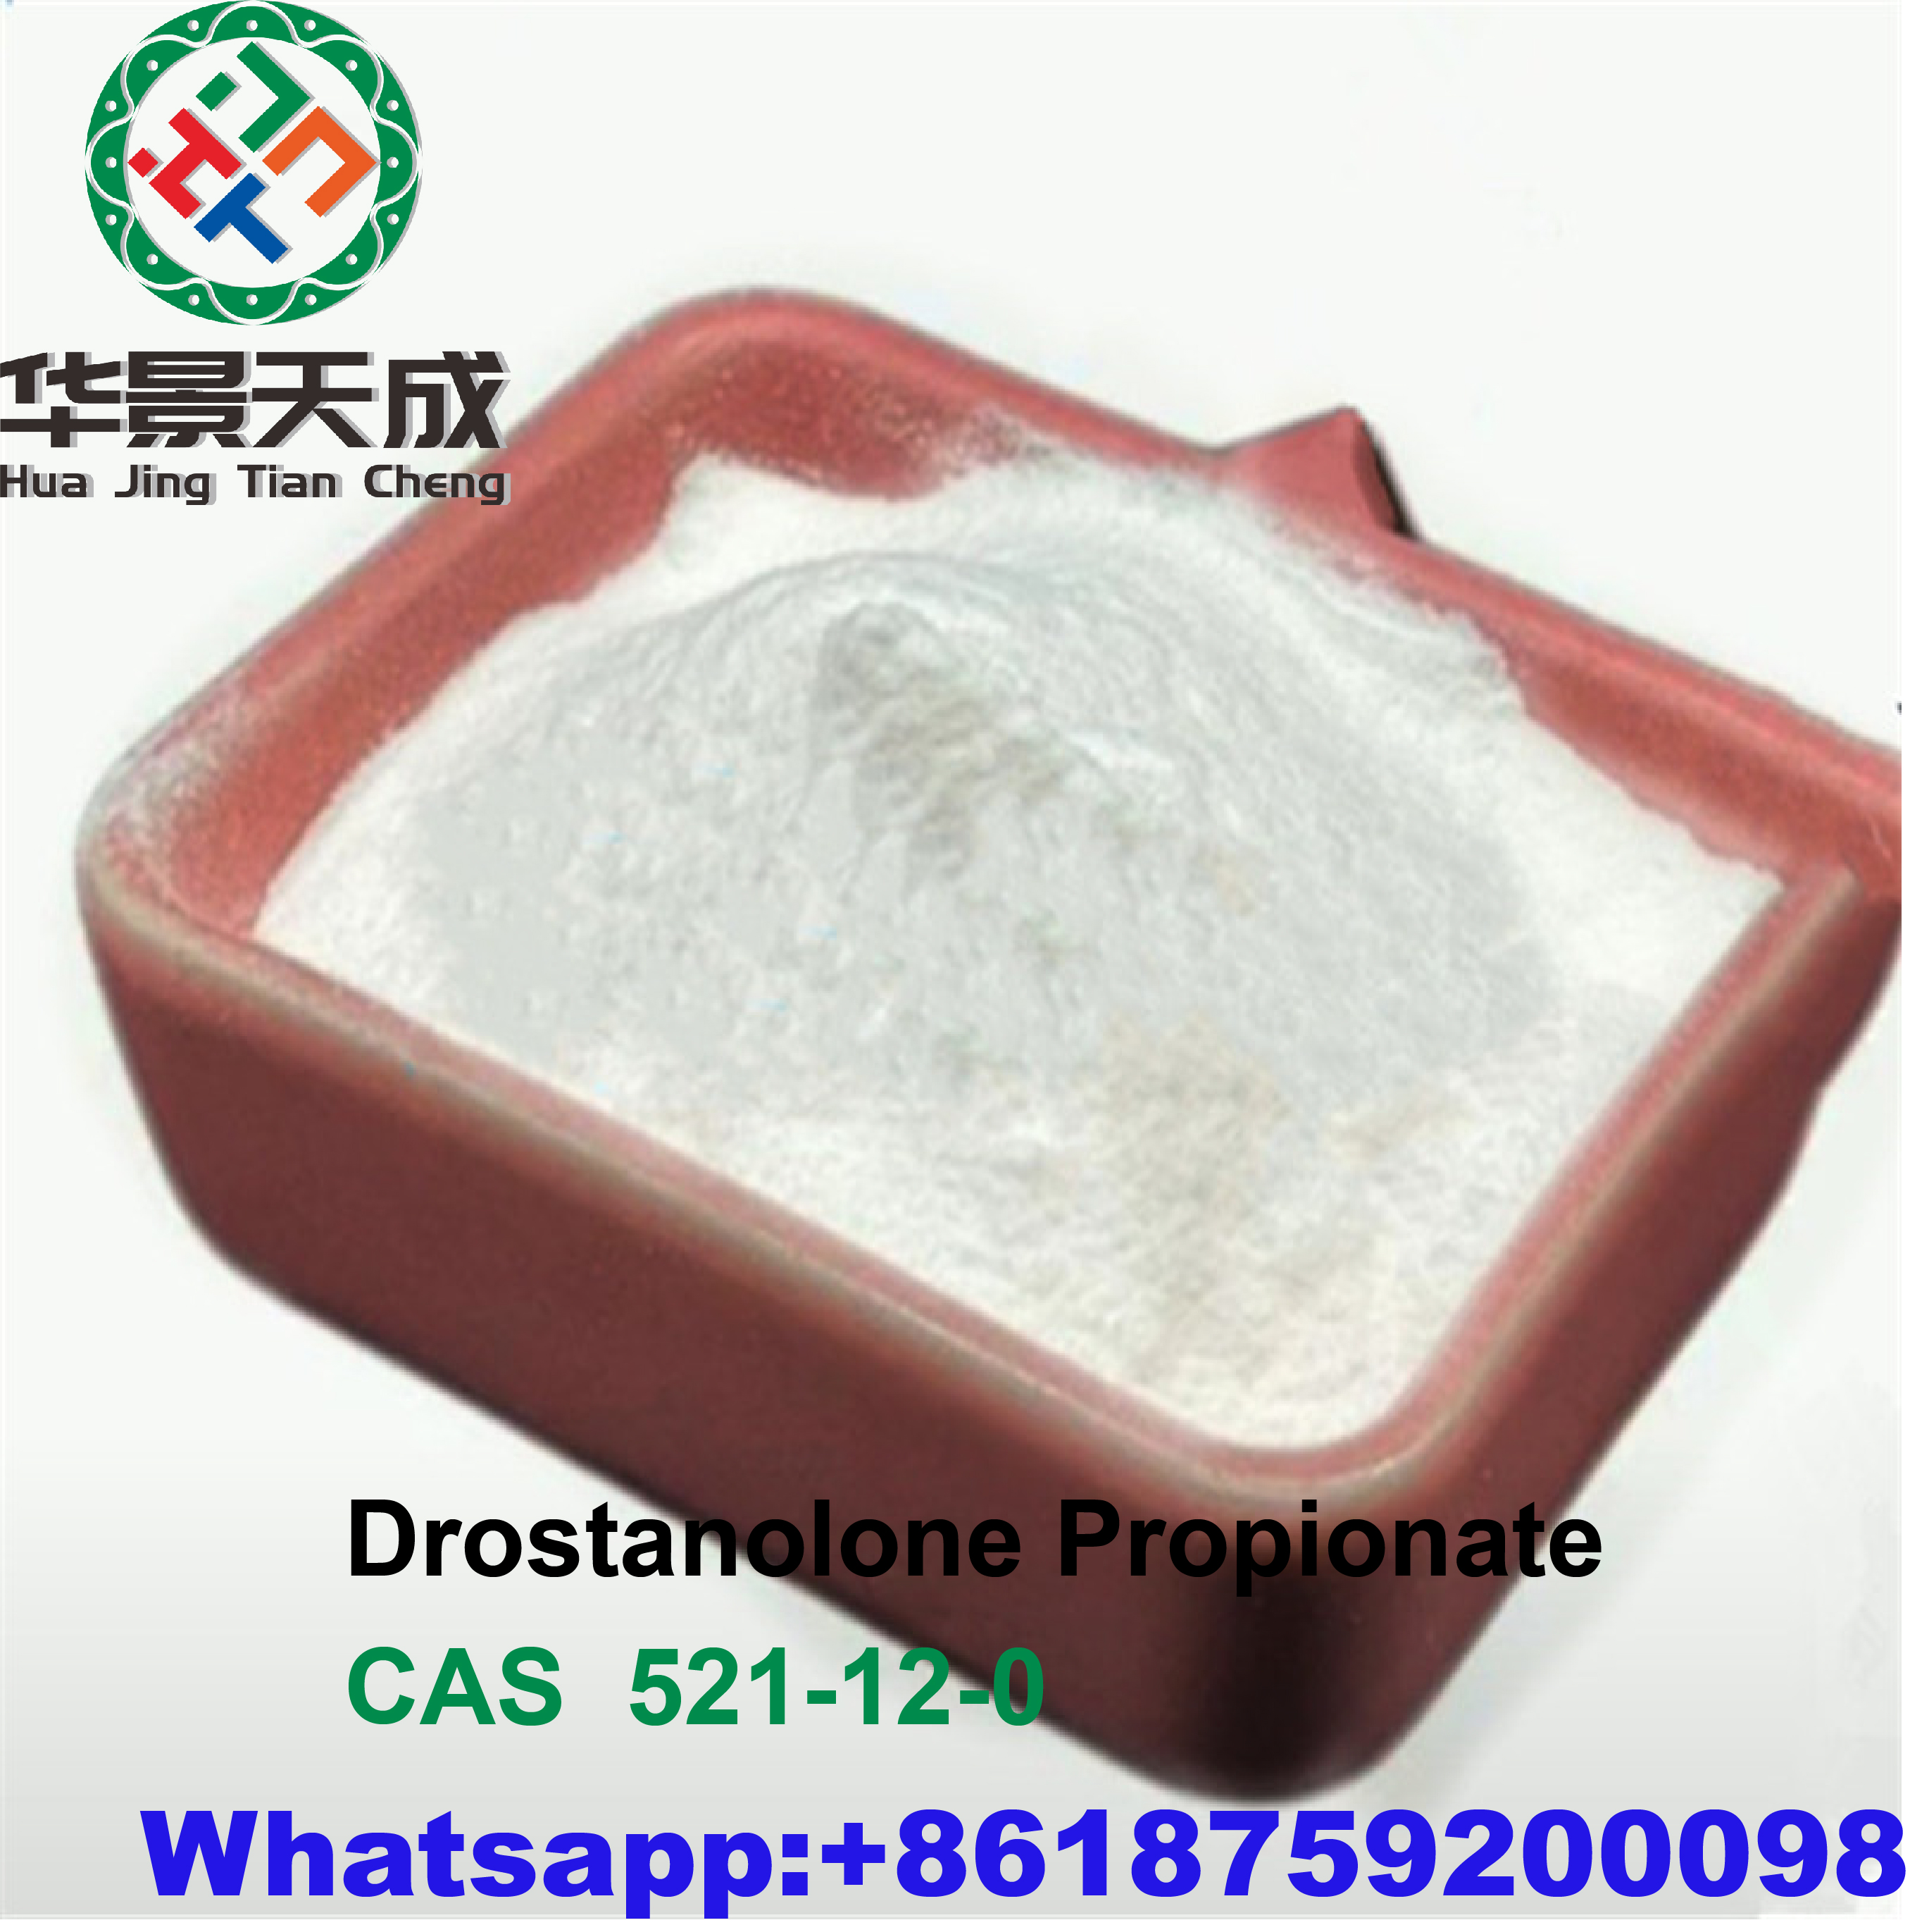 Anabolic Injection Drostanolone Propionate Steroids Powder  Masteron For Bodybuilding CasNO.521-12-0 Featured Image